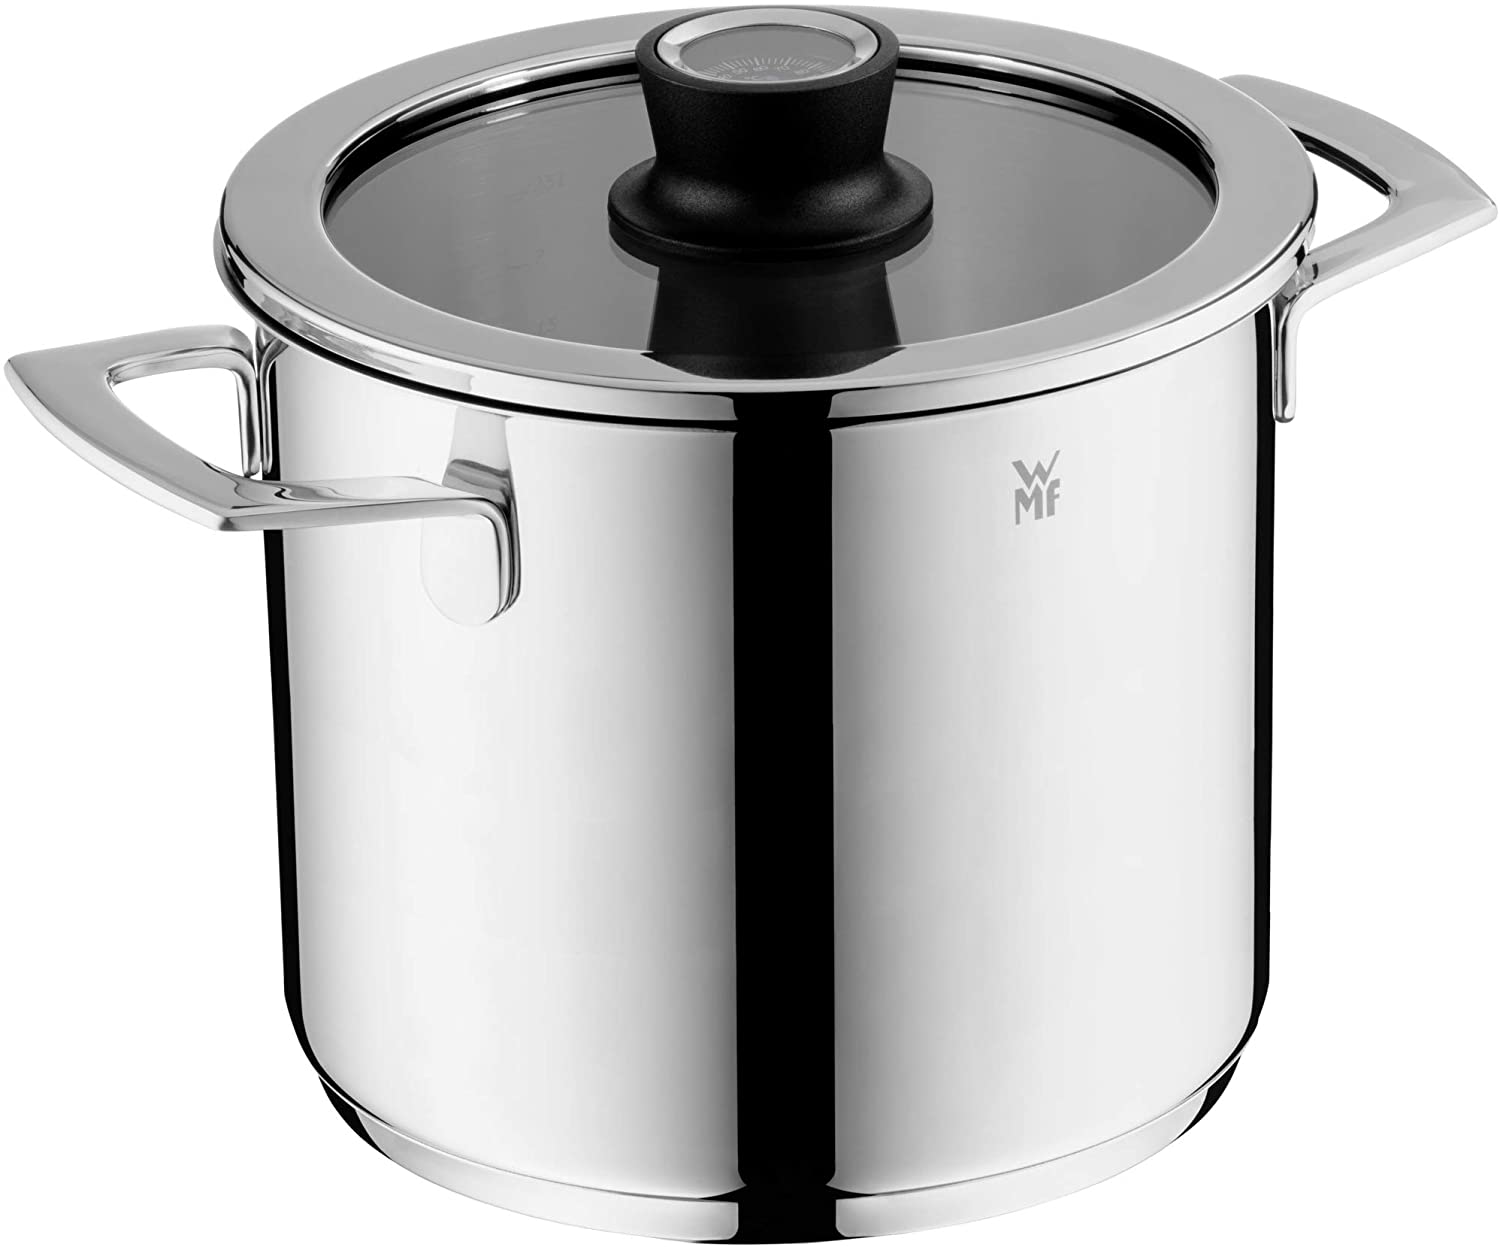 WMF VarioCuisine Vegetable Pot 20 cm Silence Glass Lid with Thermometer Pot Large 5.3 L Cromargan Polished Stainless Steel Pot Induction Silicone Rim